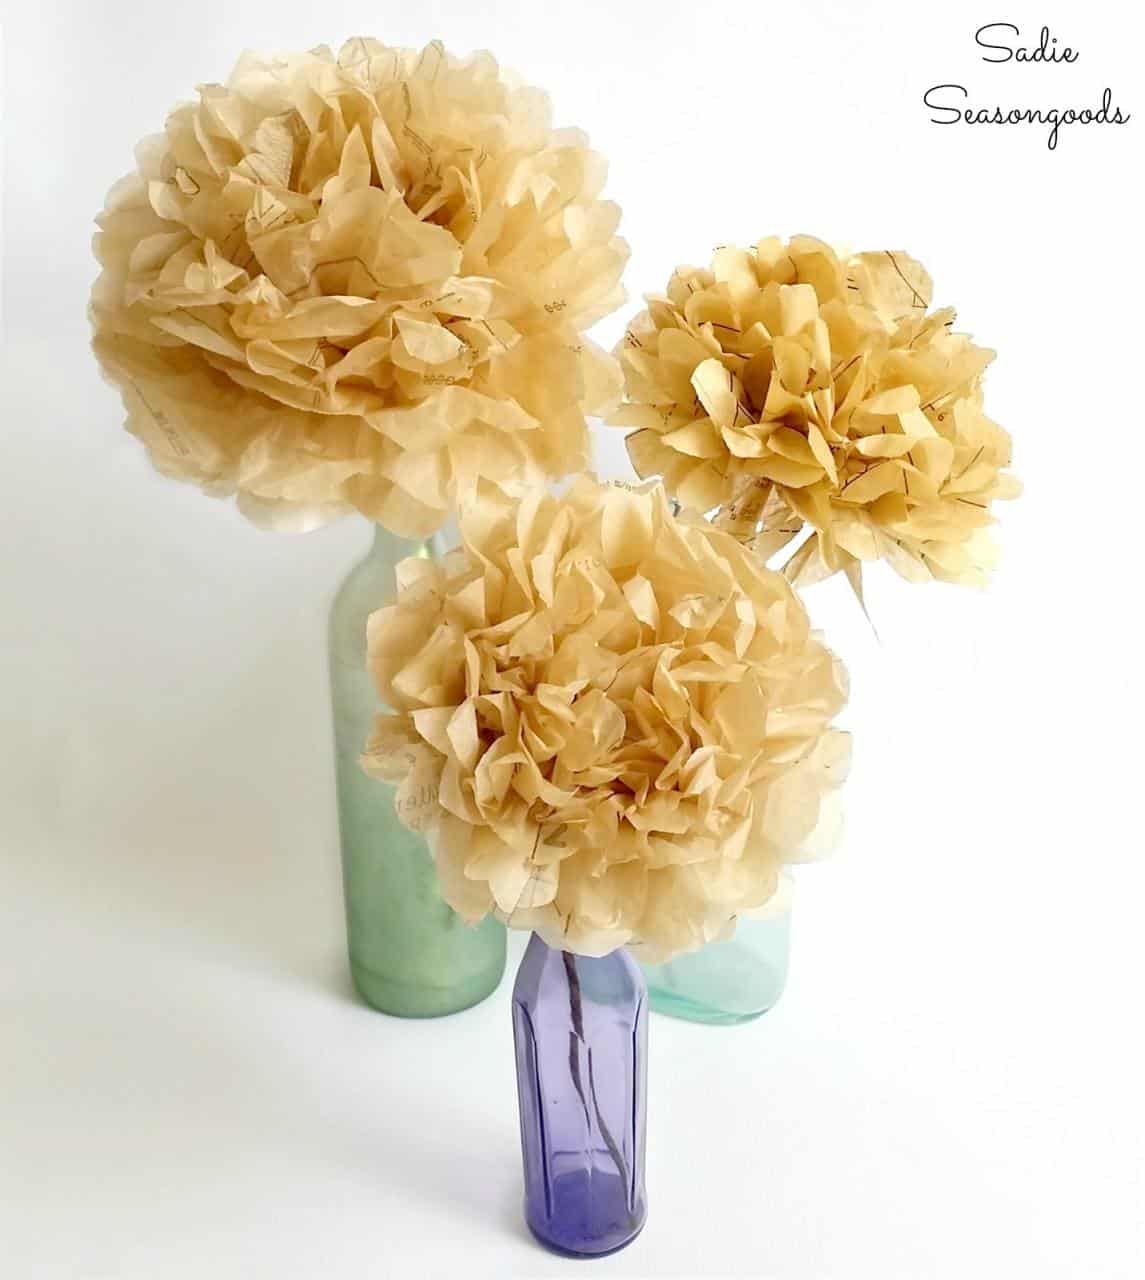 6 Vintage Flower Themed DIY Projects